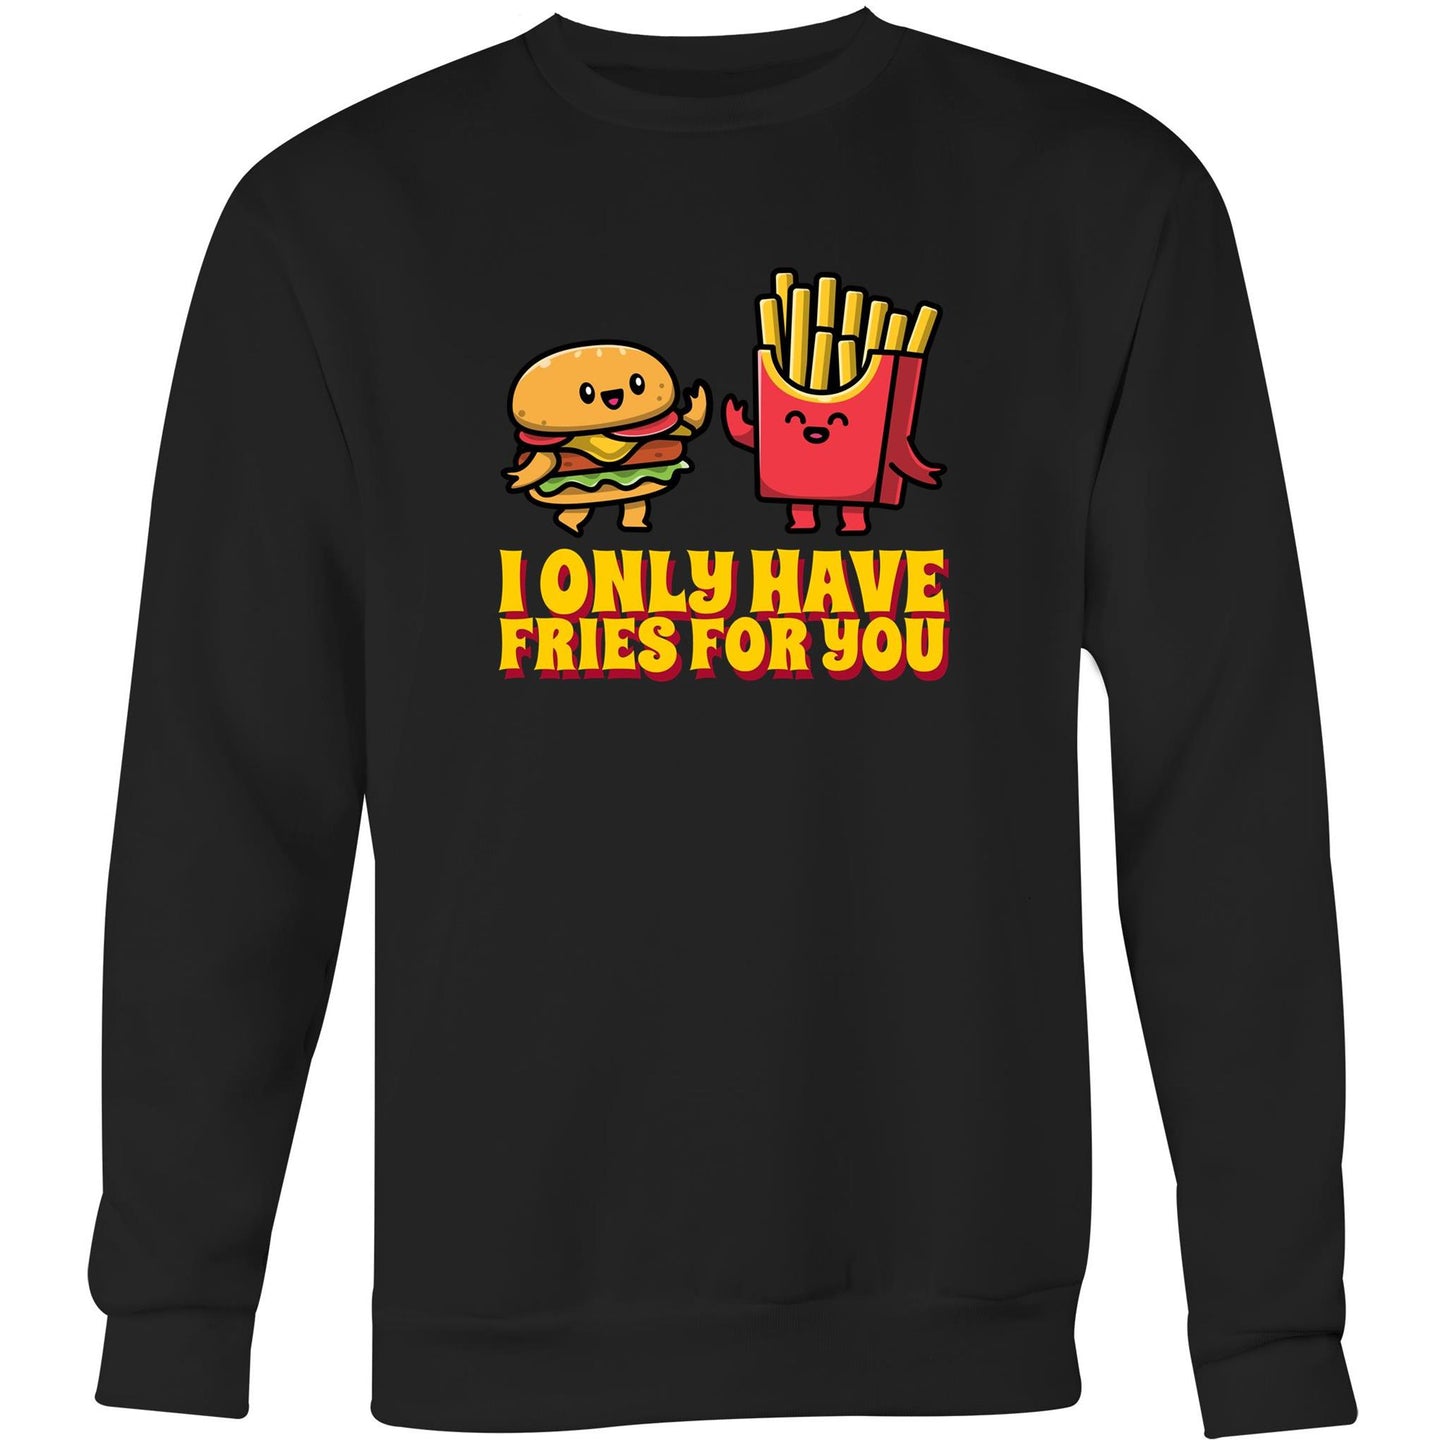 I Only Have Fries For You, Burger And Fries - Crew Sweatshirt Black Sweatshirt